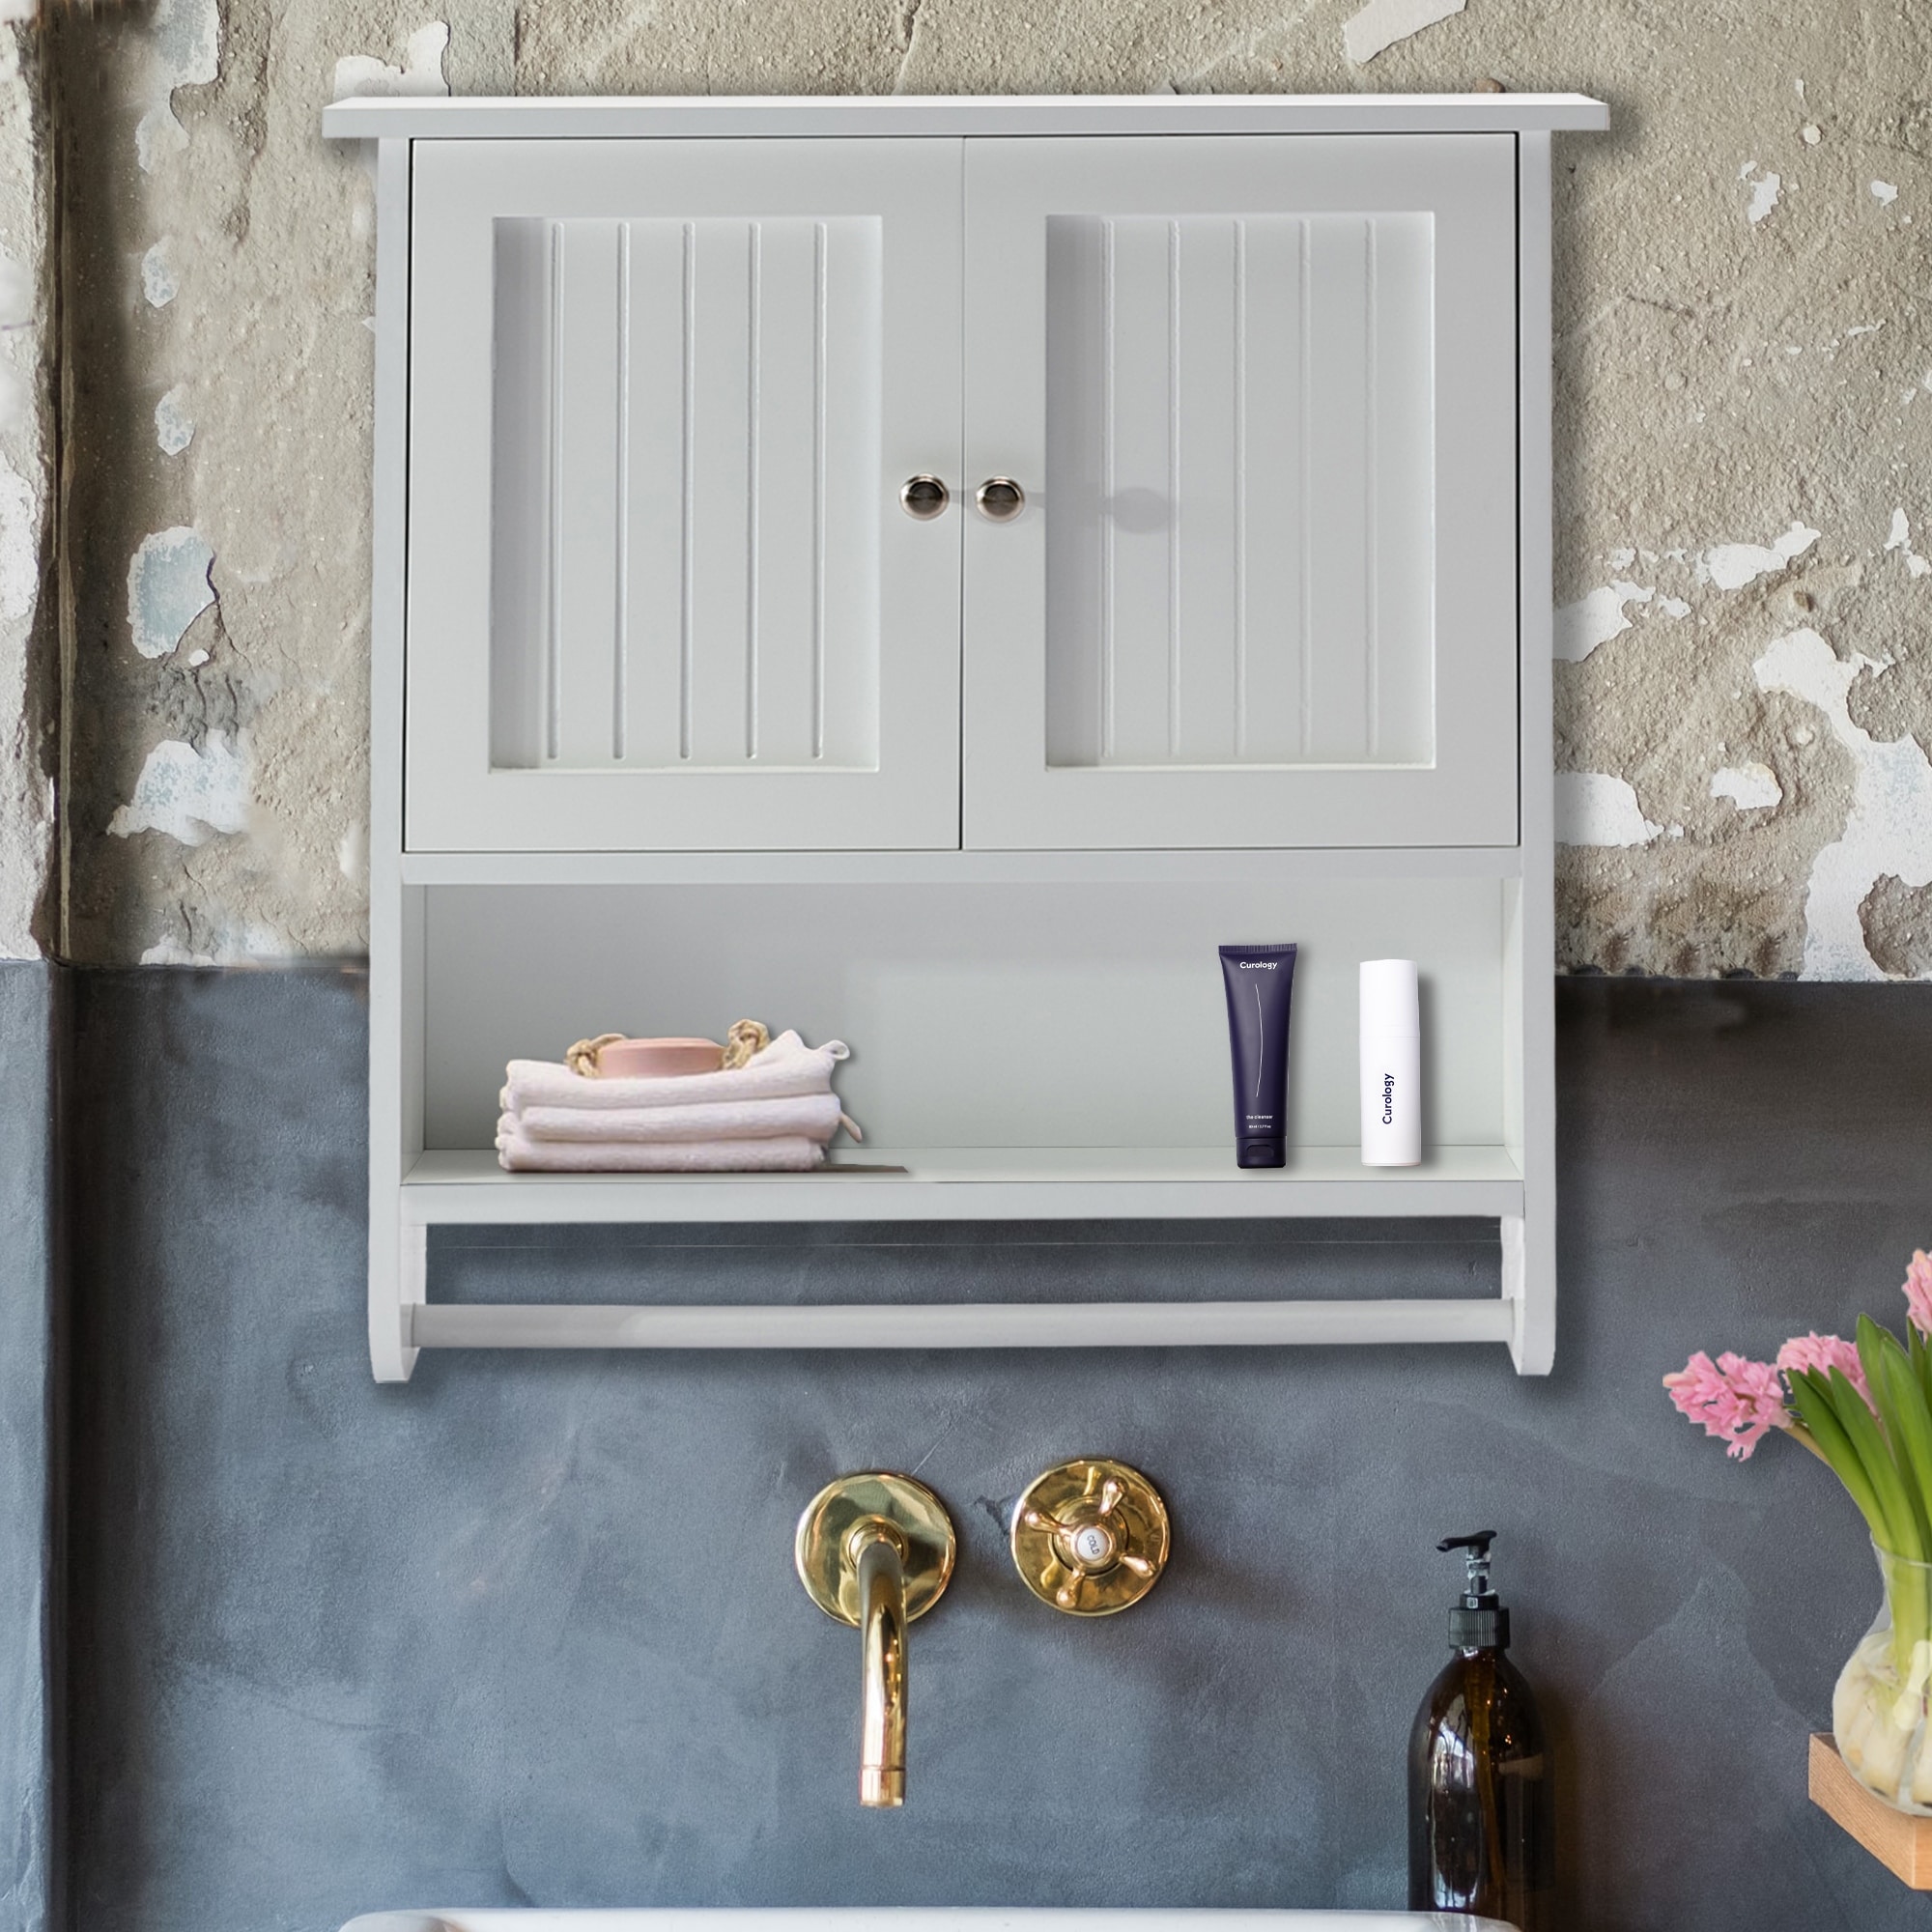 25.6in. H x 5.1 in. W x 24 in. L Wall Mount Bathroom Wall Cabinet Storage  with Double Doors in White - Bed Bath & Beyond - 35642865